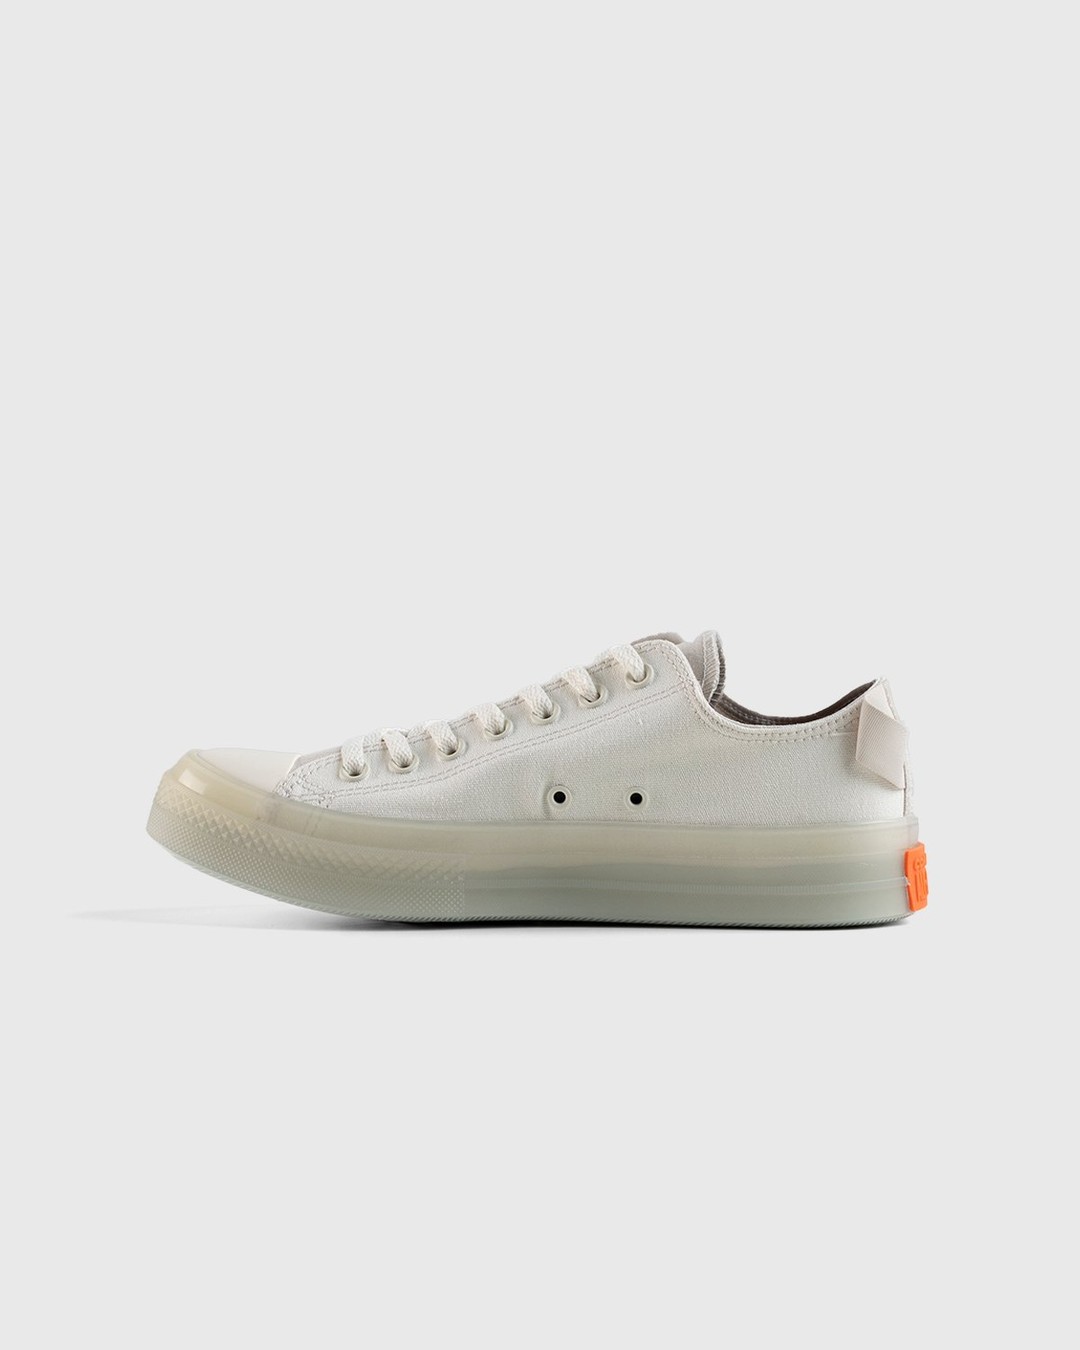 Converse – Chuck Taylor All Star CX Egret/Desert Sand - Sneakers - Grey - Image 2